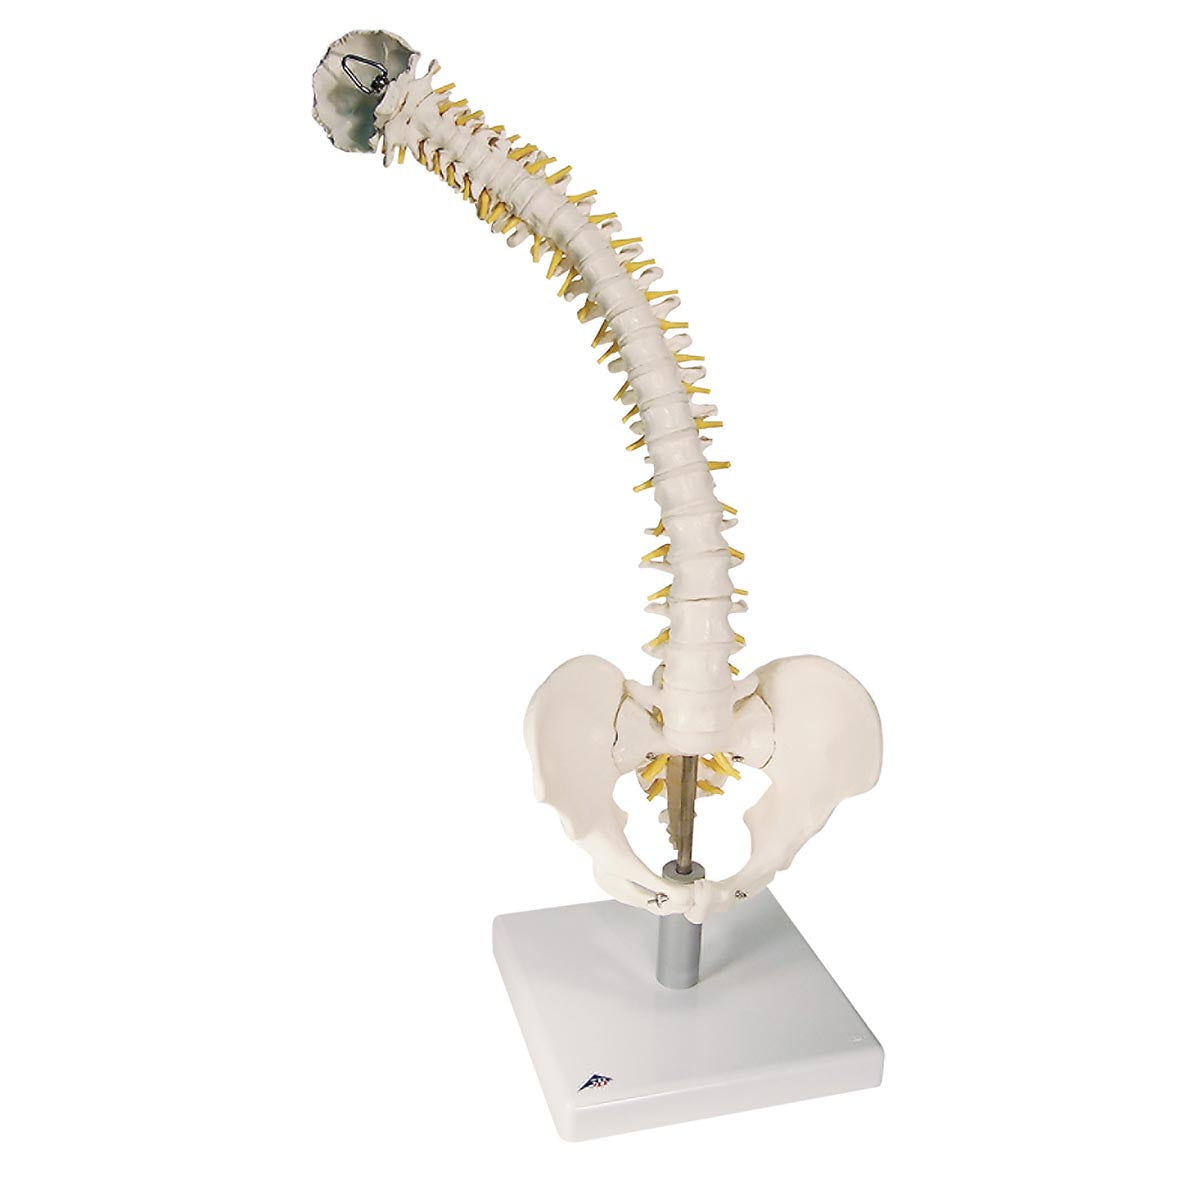 Flexible model of the spine with extra-soft discs, nerves etc. presented on a stand